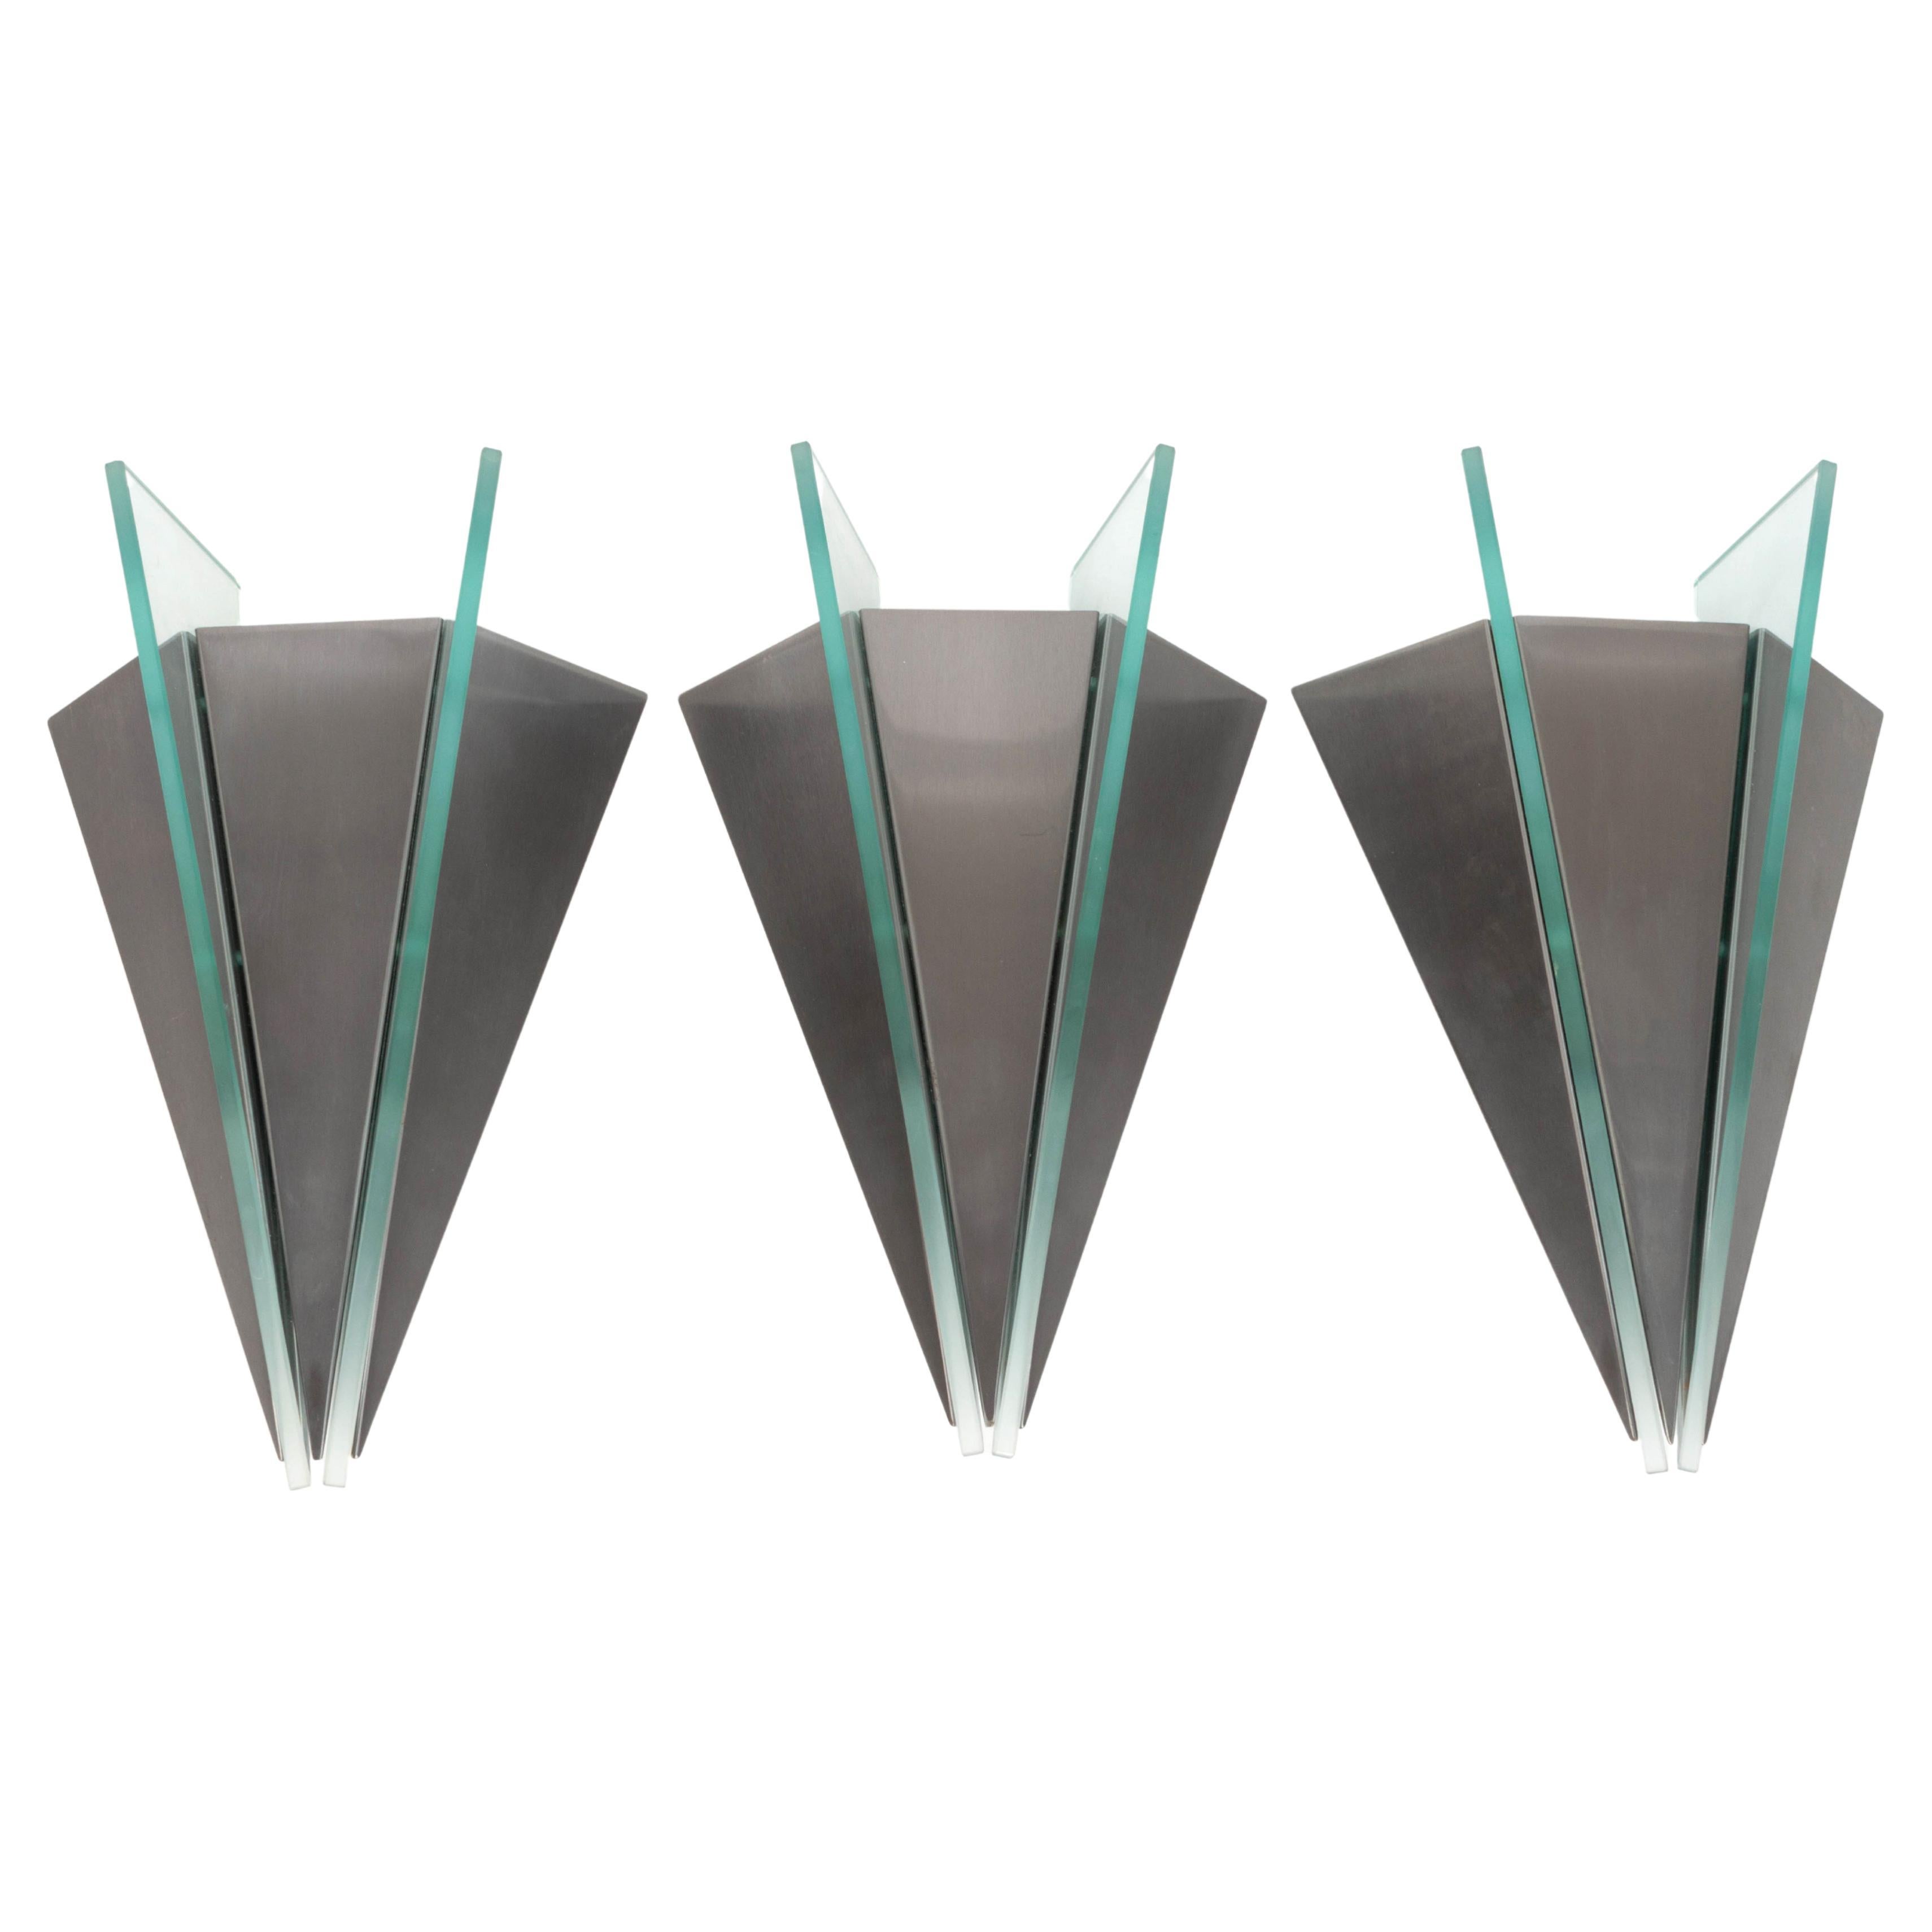 J T Kalmar, Vienna, Austria C.1970

A set of five brushed steel and glass Geometric wall sconces, with wall hanging brackets and lamp holder (5) 

All in very good condition commensurate with age. Two sconces have a very small flea bite to one